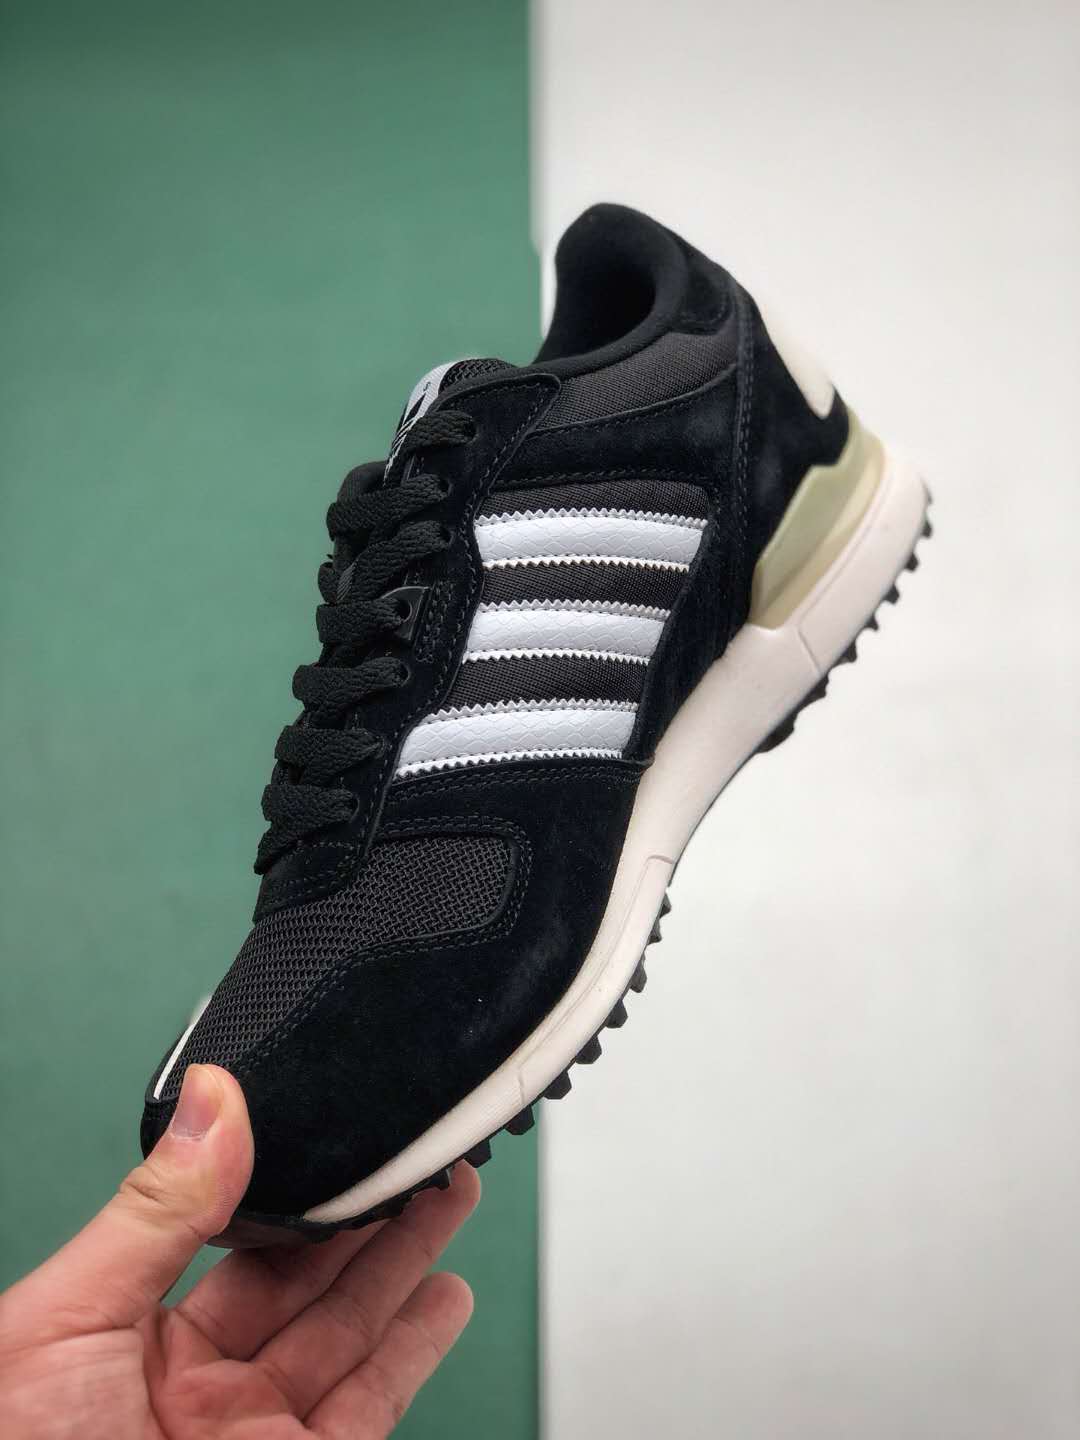 Adidas ZX 700 Black White B24842 - Classic Sneakers for a Sporty Look